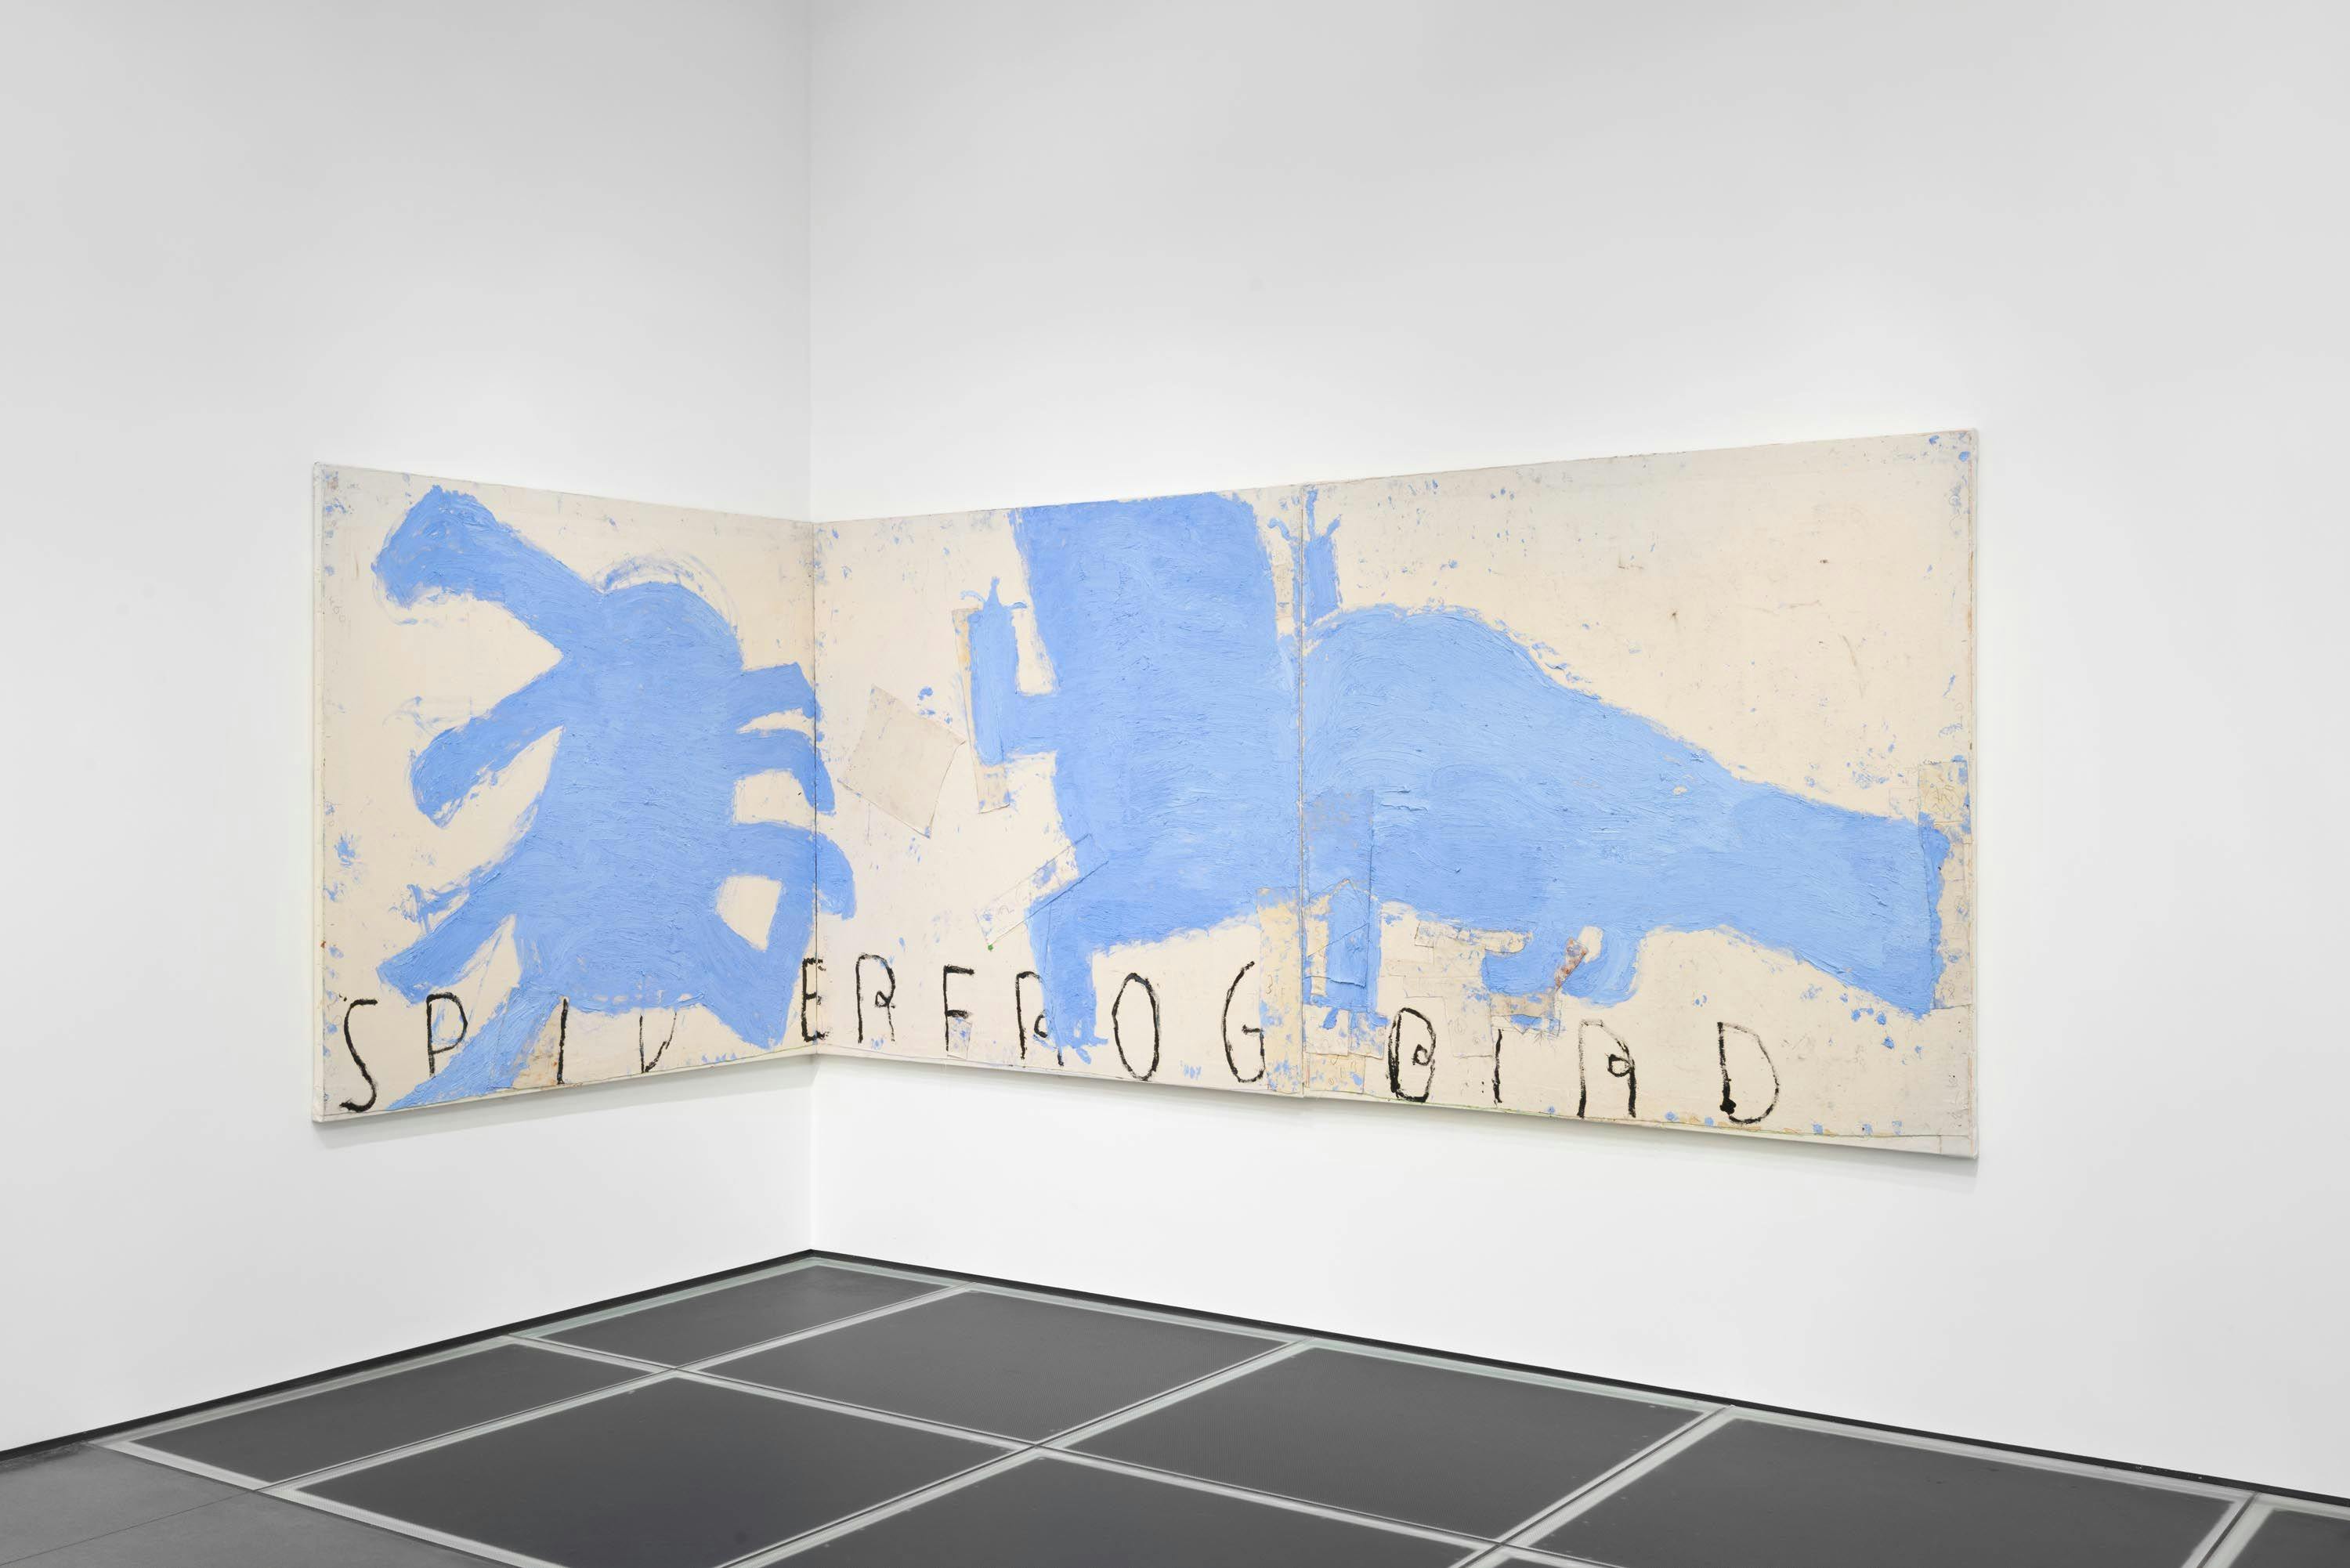 Installation view of the exhibition, Rose Wylie: where i am and was, at Aspen Art Museum in Aspen, dated 2020.